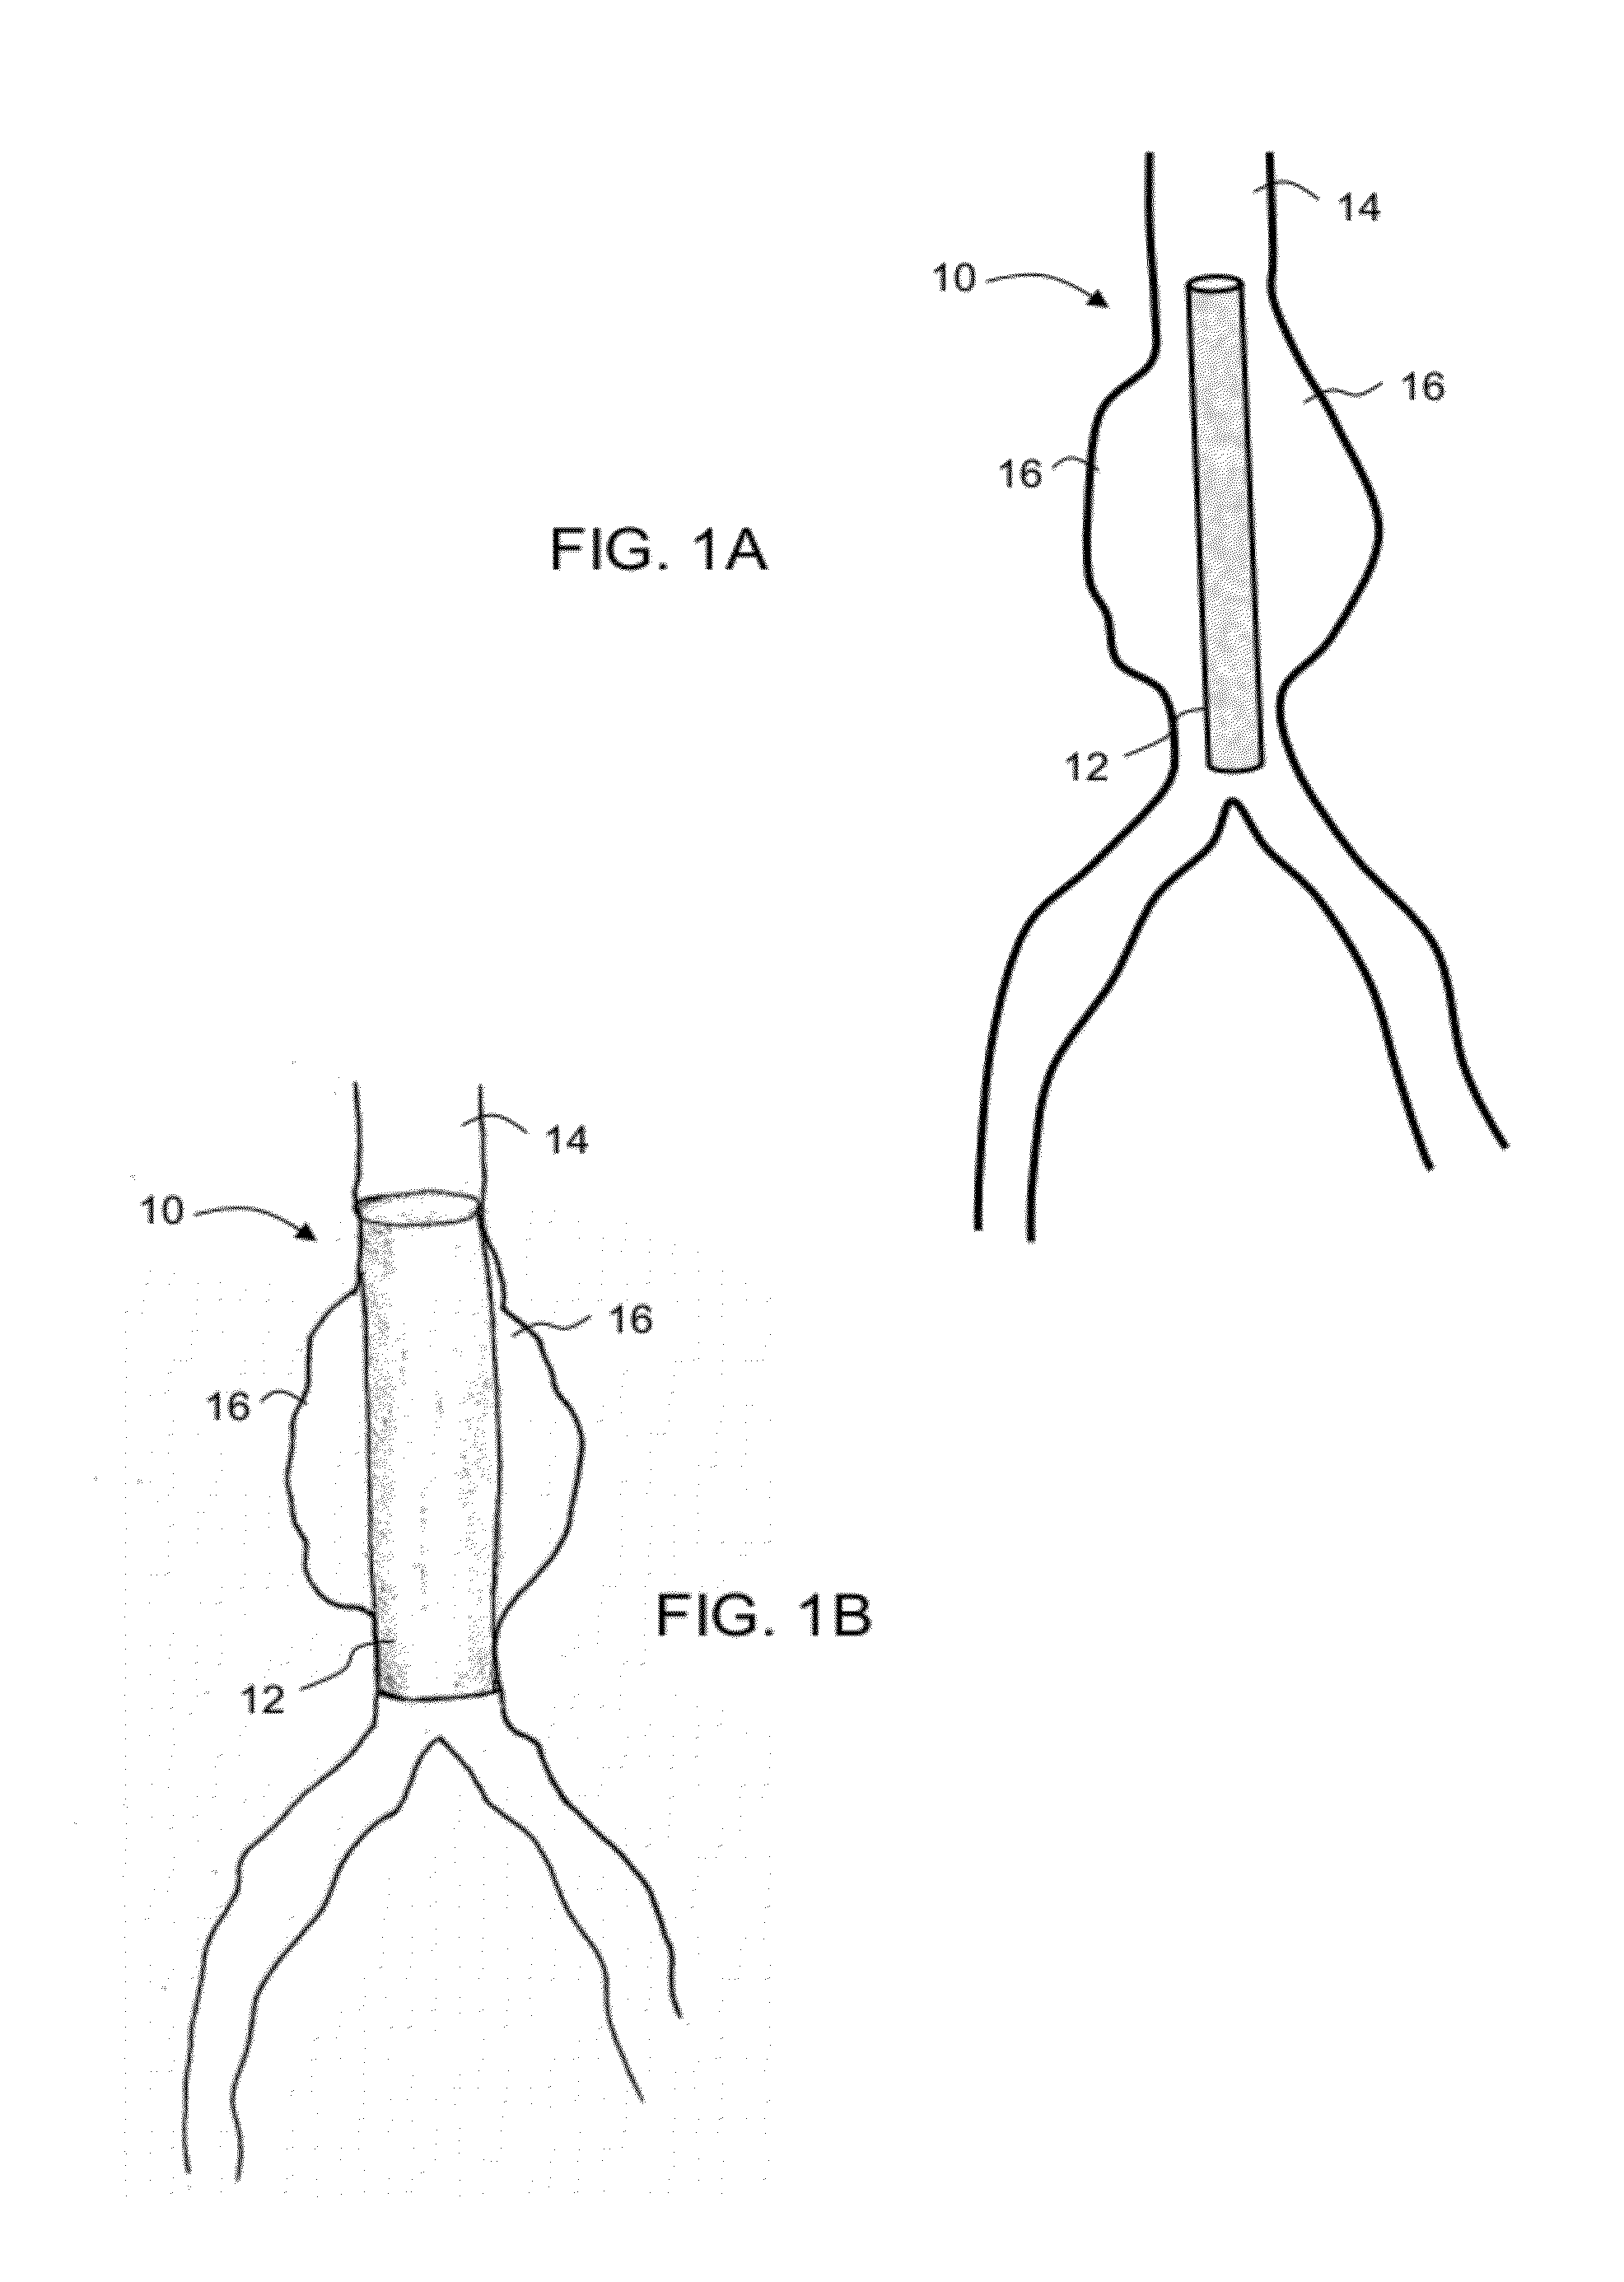 Intraluminal polymeric devices for the treatment of aneurysms